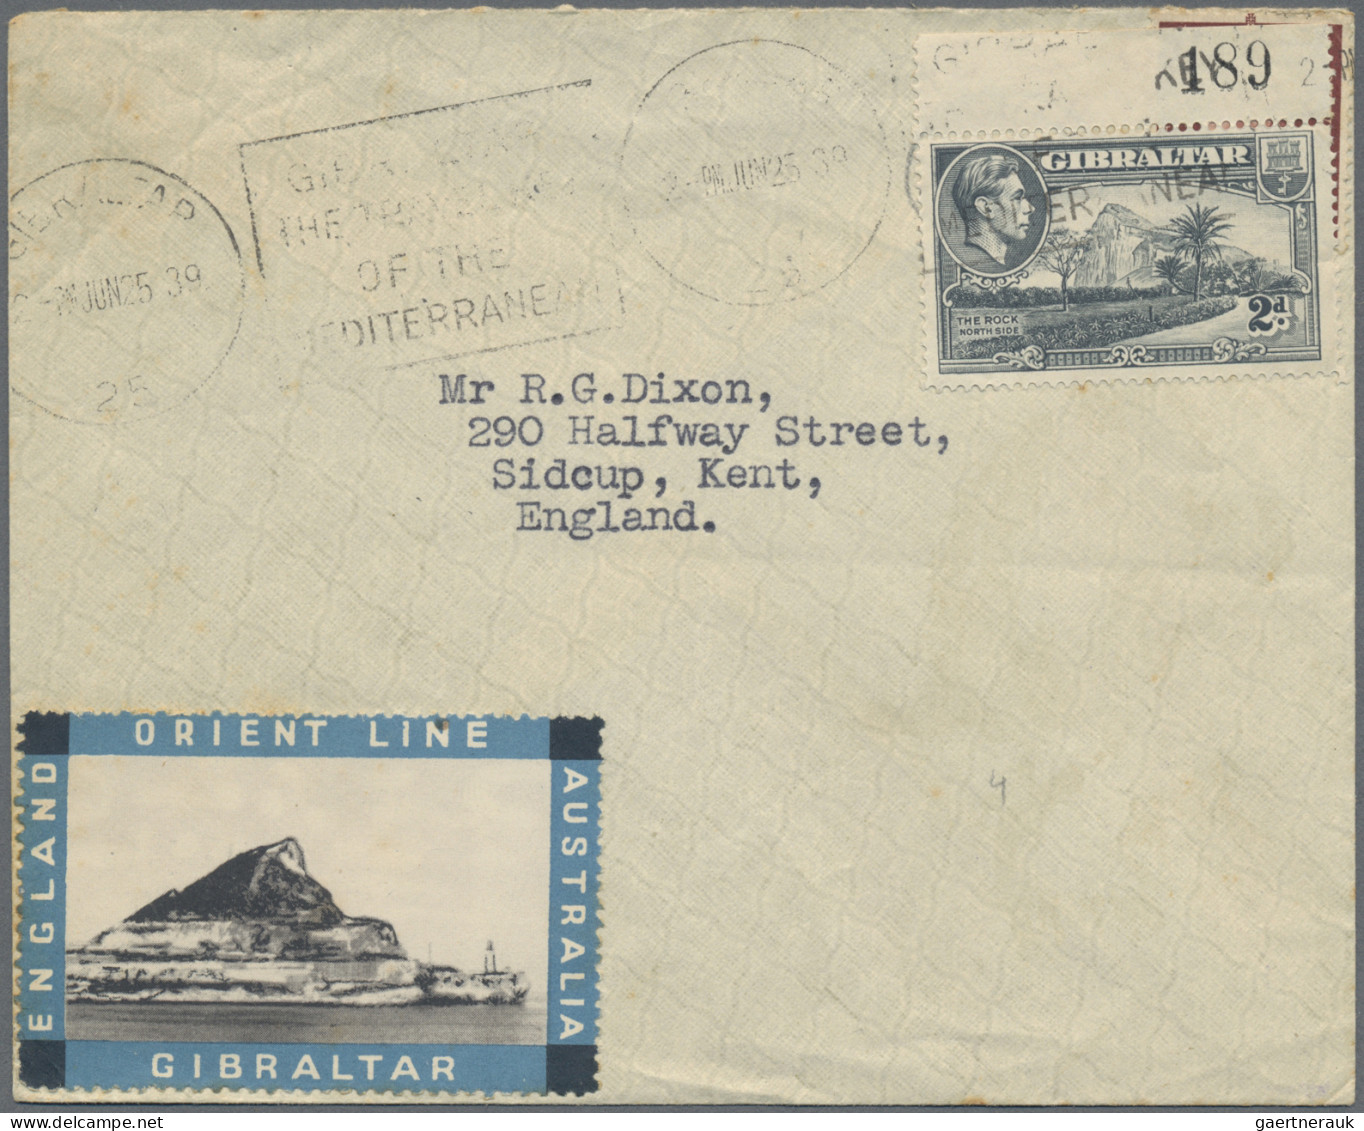 Gibraltar: 1840/1940's: 32 covers, postcards and picture postcards from Gibralta